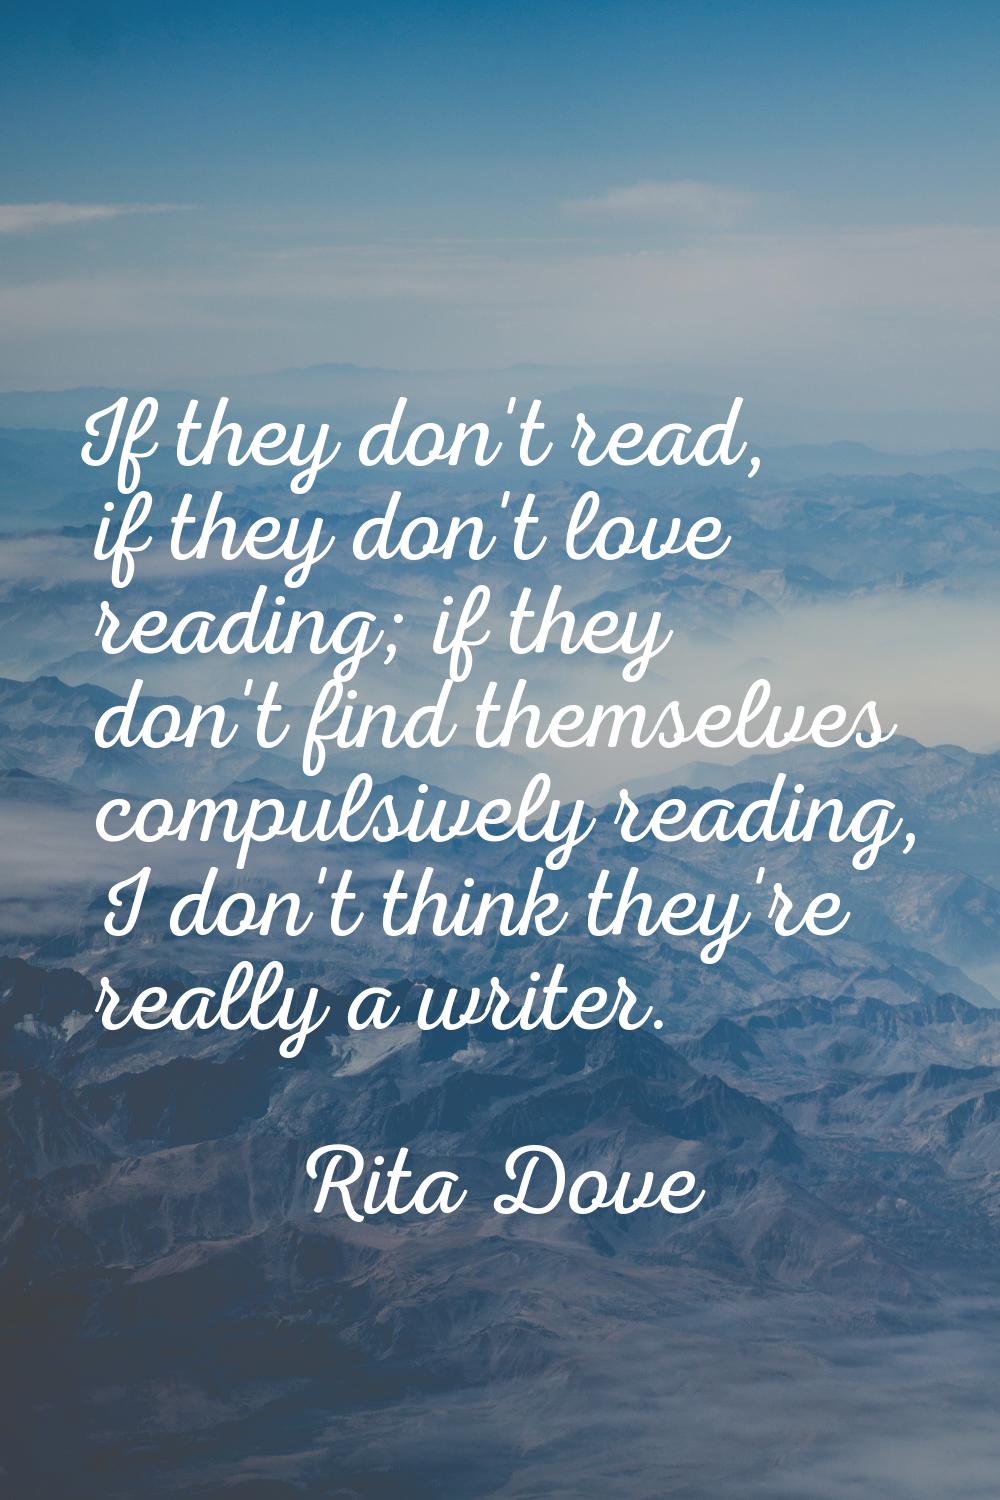 If they don't read, if they don't love reading; if they don't find themselves compulsively reading,